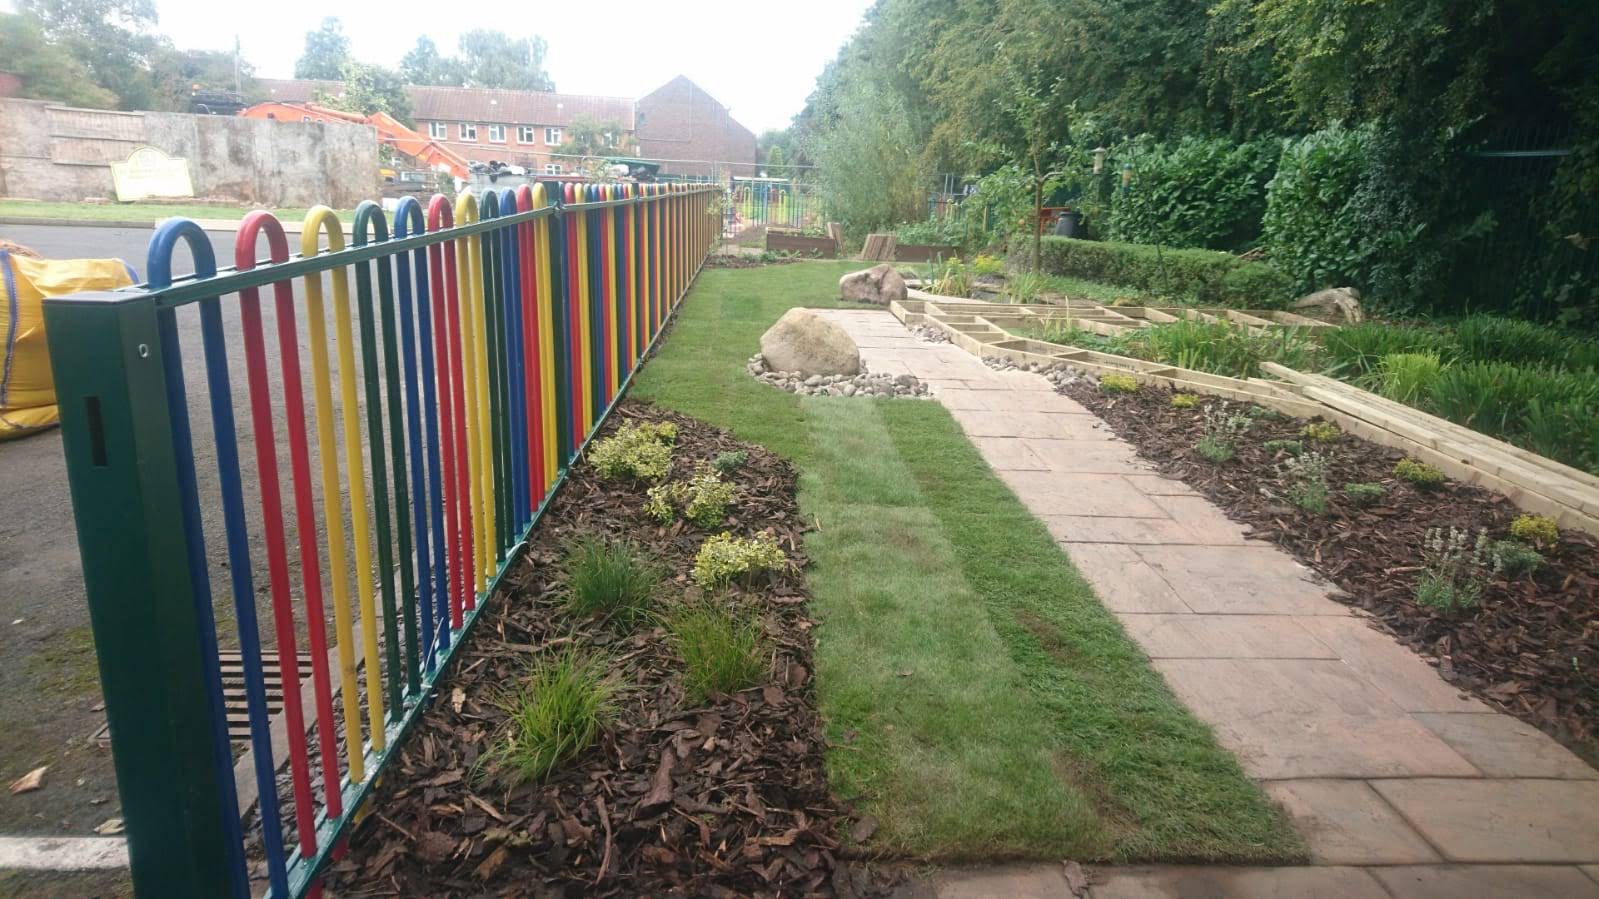 bespoke garden work path and fencing